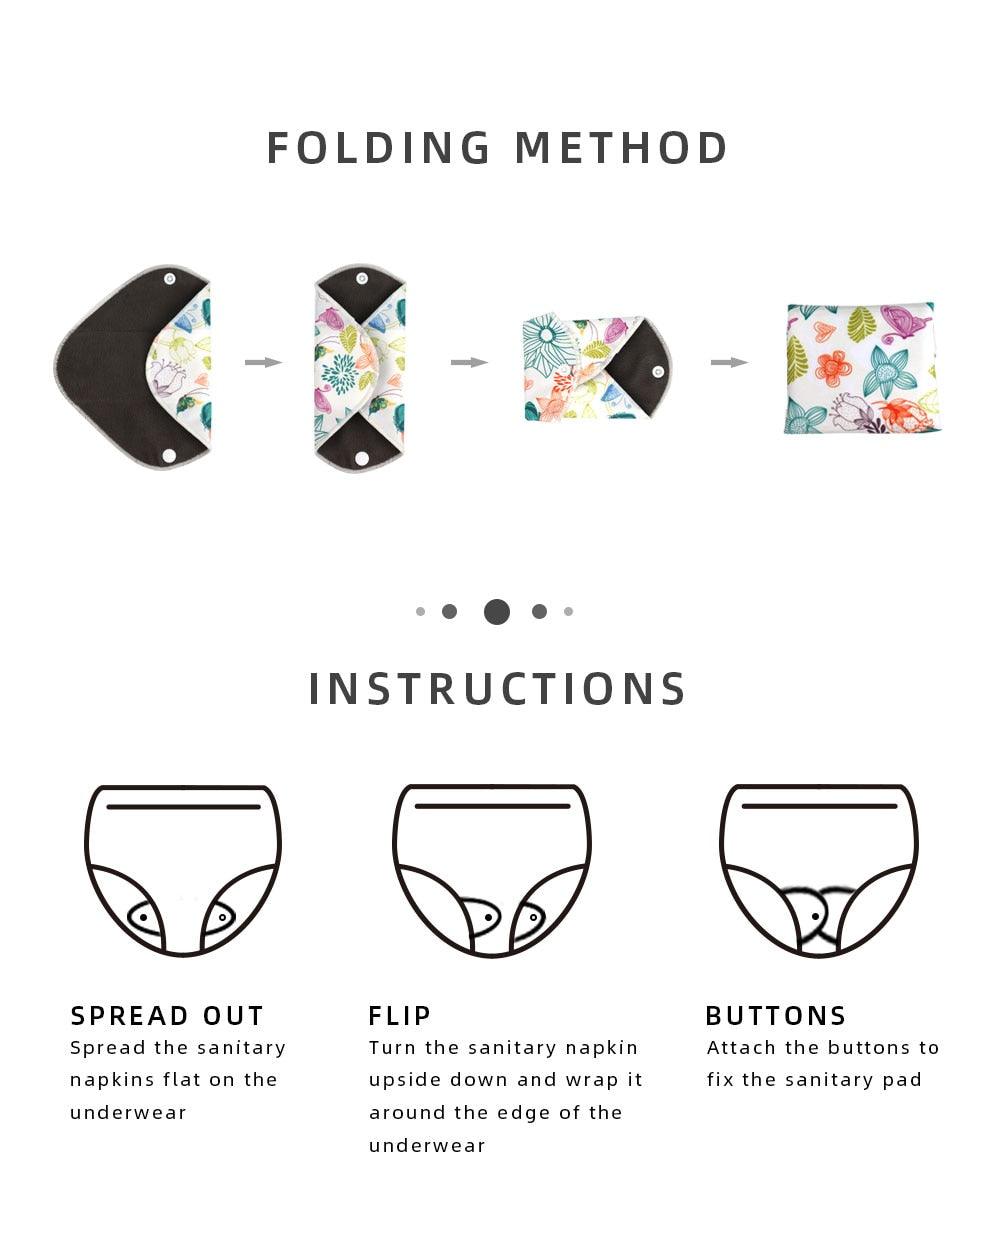 Earthly Comfort: Reusable Cloth Pads for Sustainable Periods